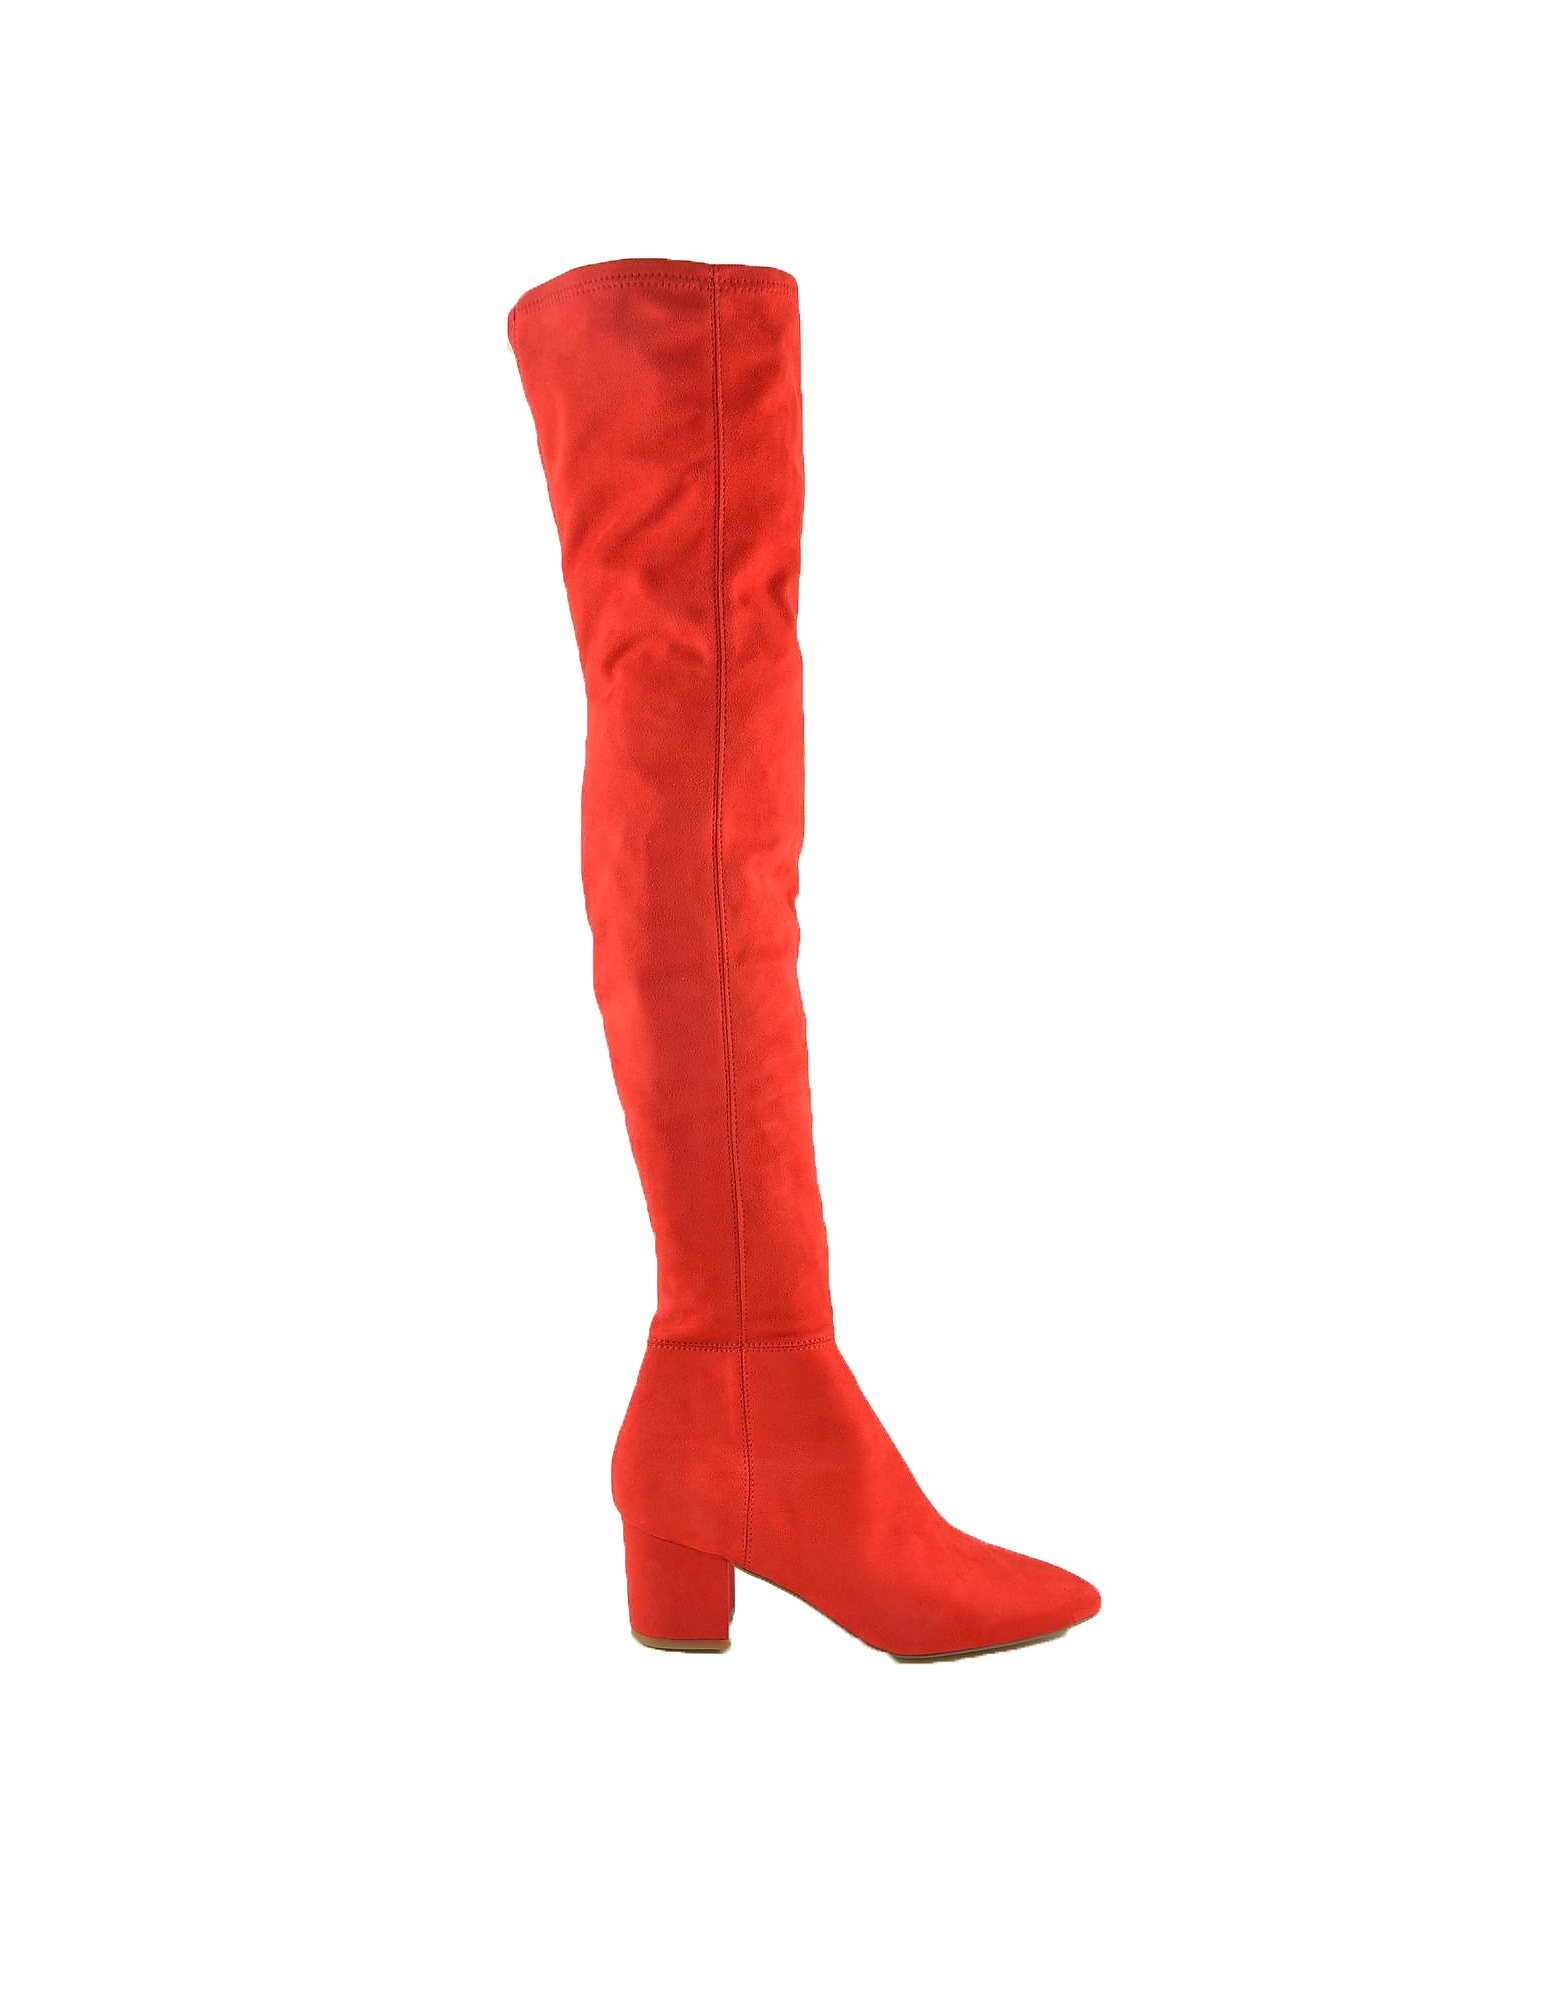 Steve Madden  Shoes Deep Red Over-The-Knee Boots